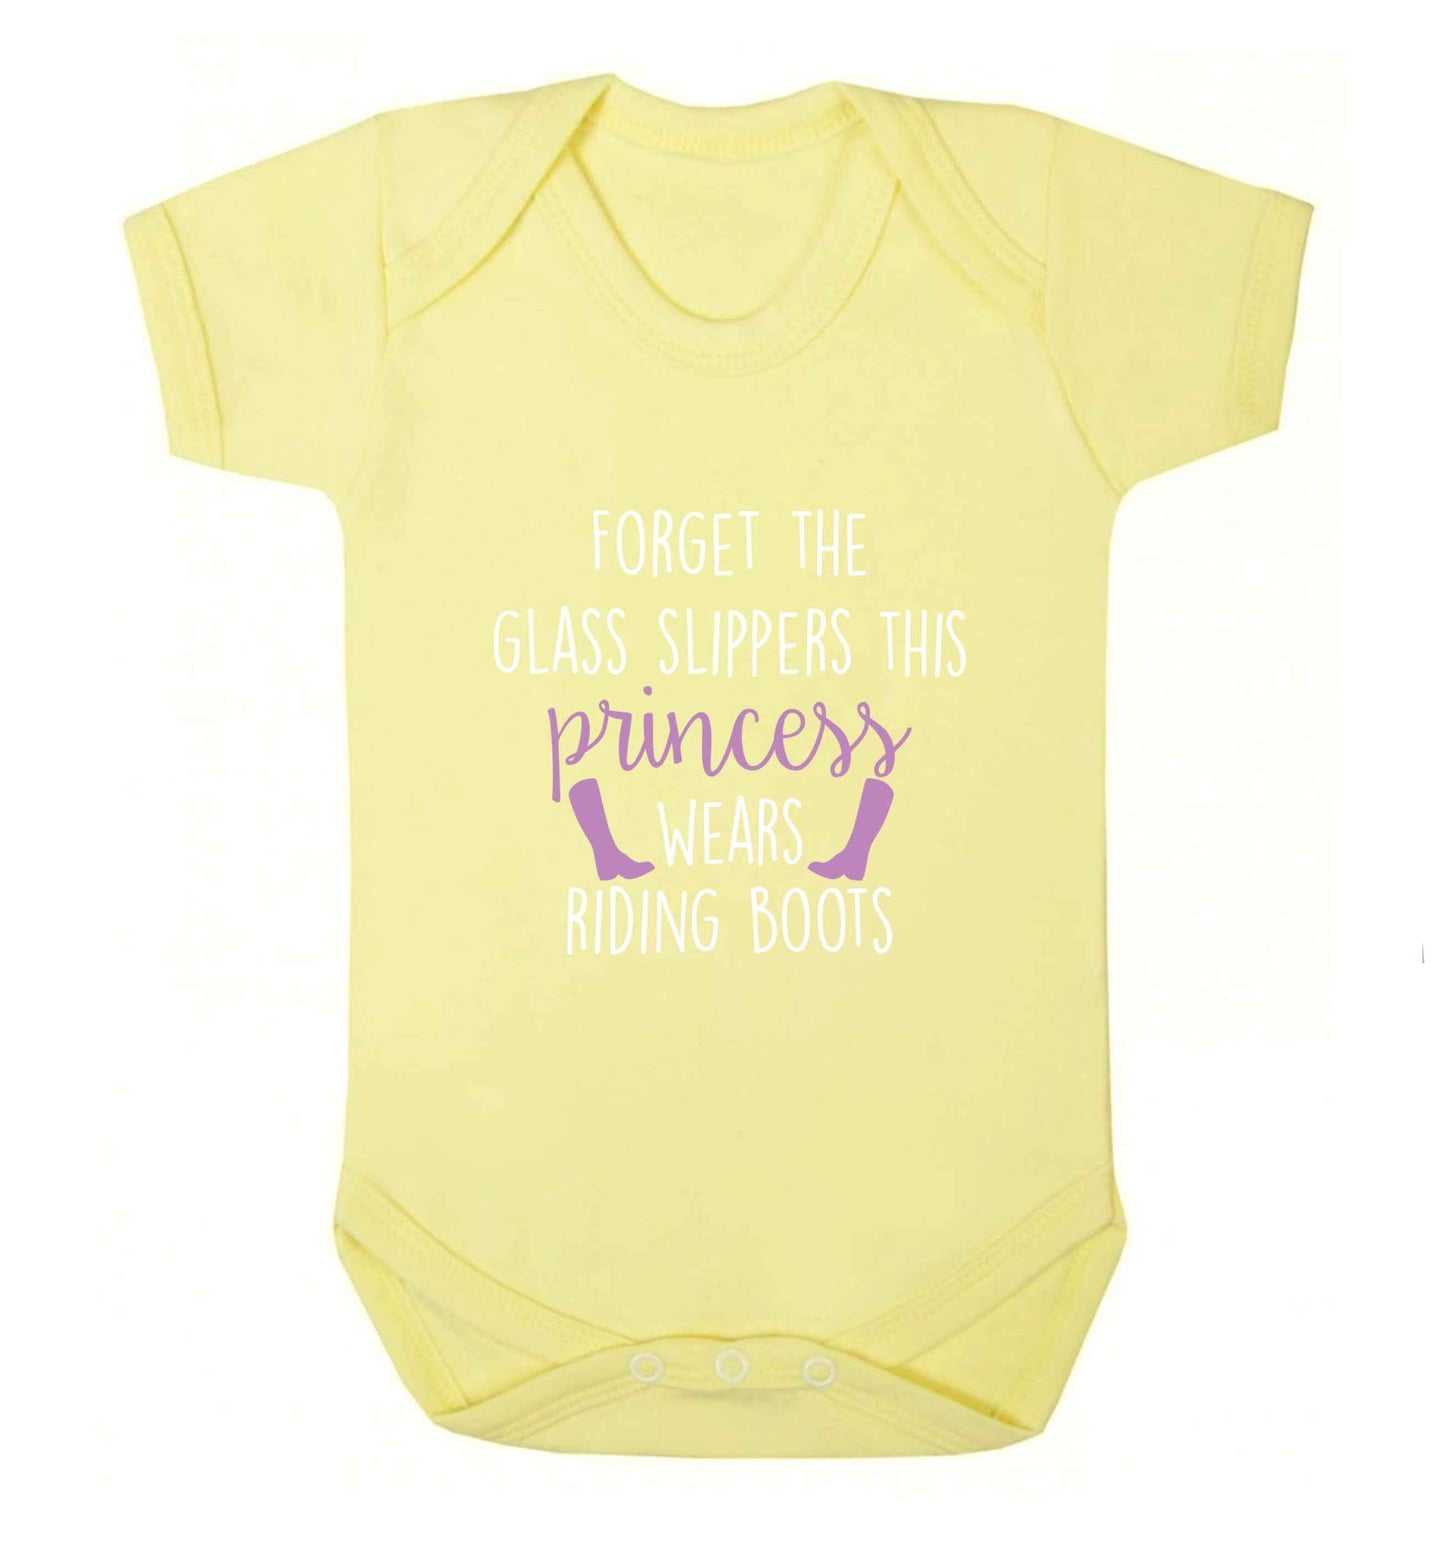 Forget the glass slippers this princess wears riding boots baby vest pale yellow 18-24 months